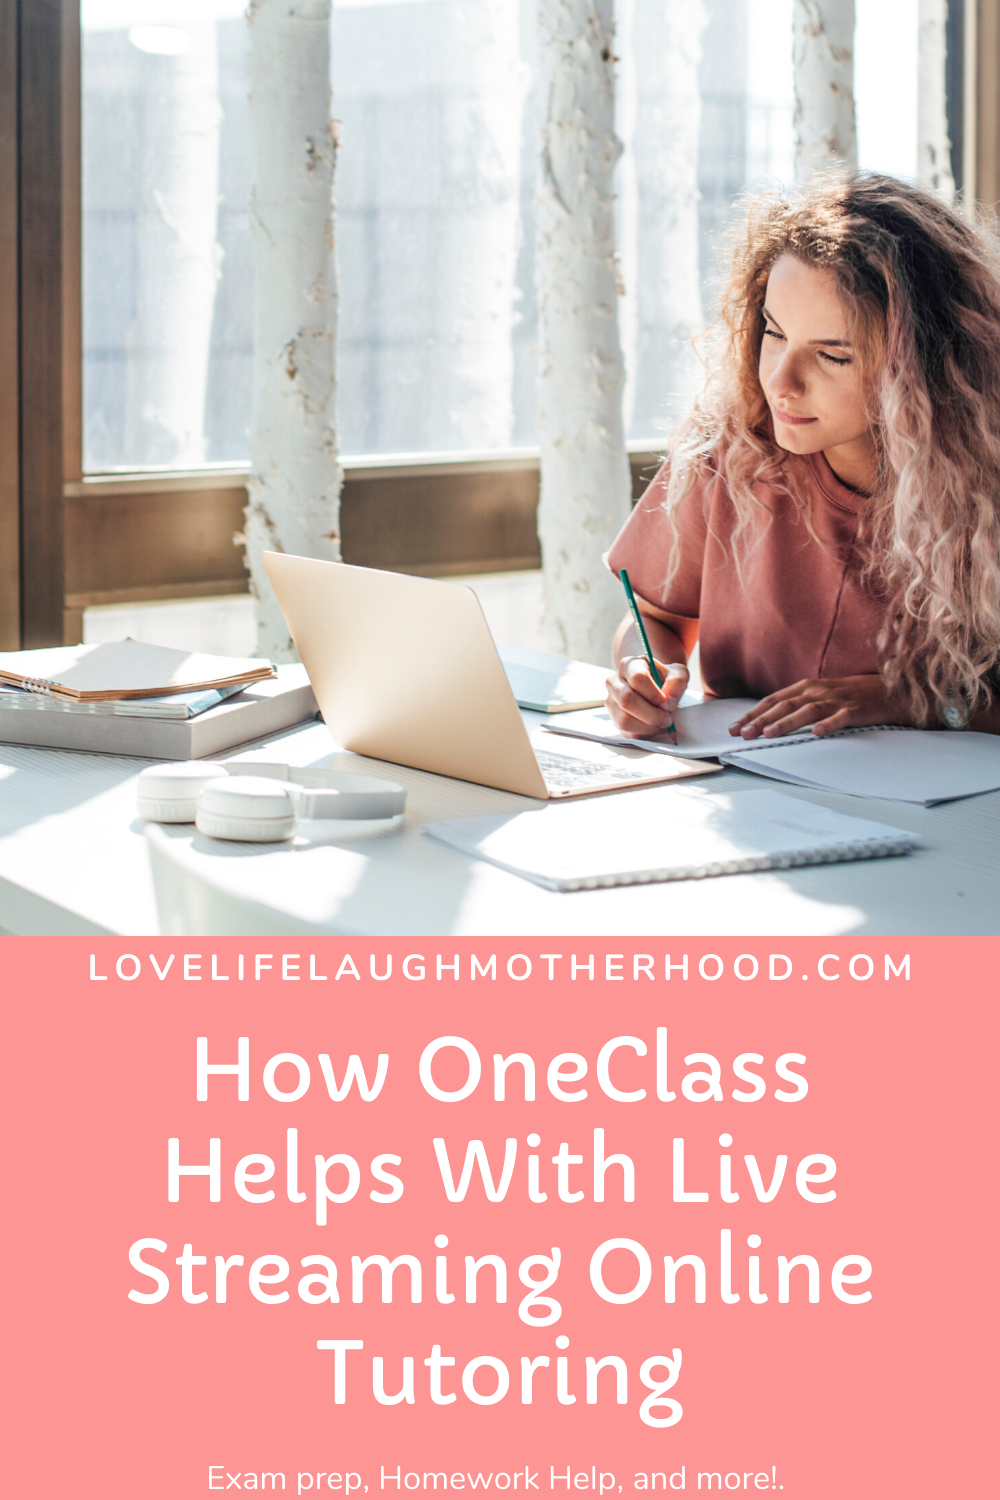 OneClass live streaming tutoring sessions